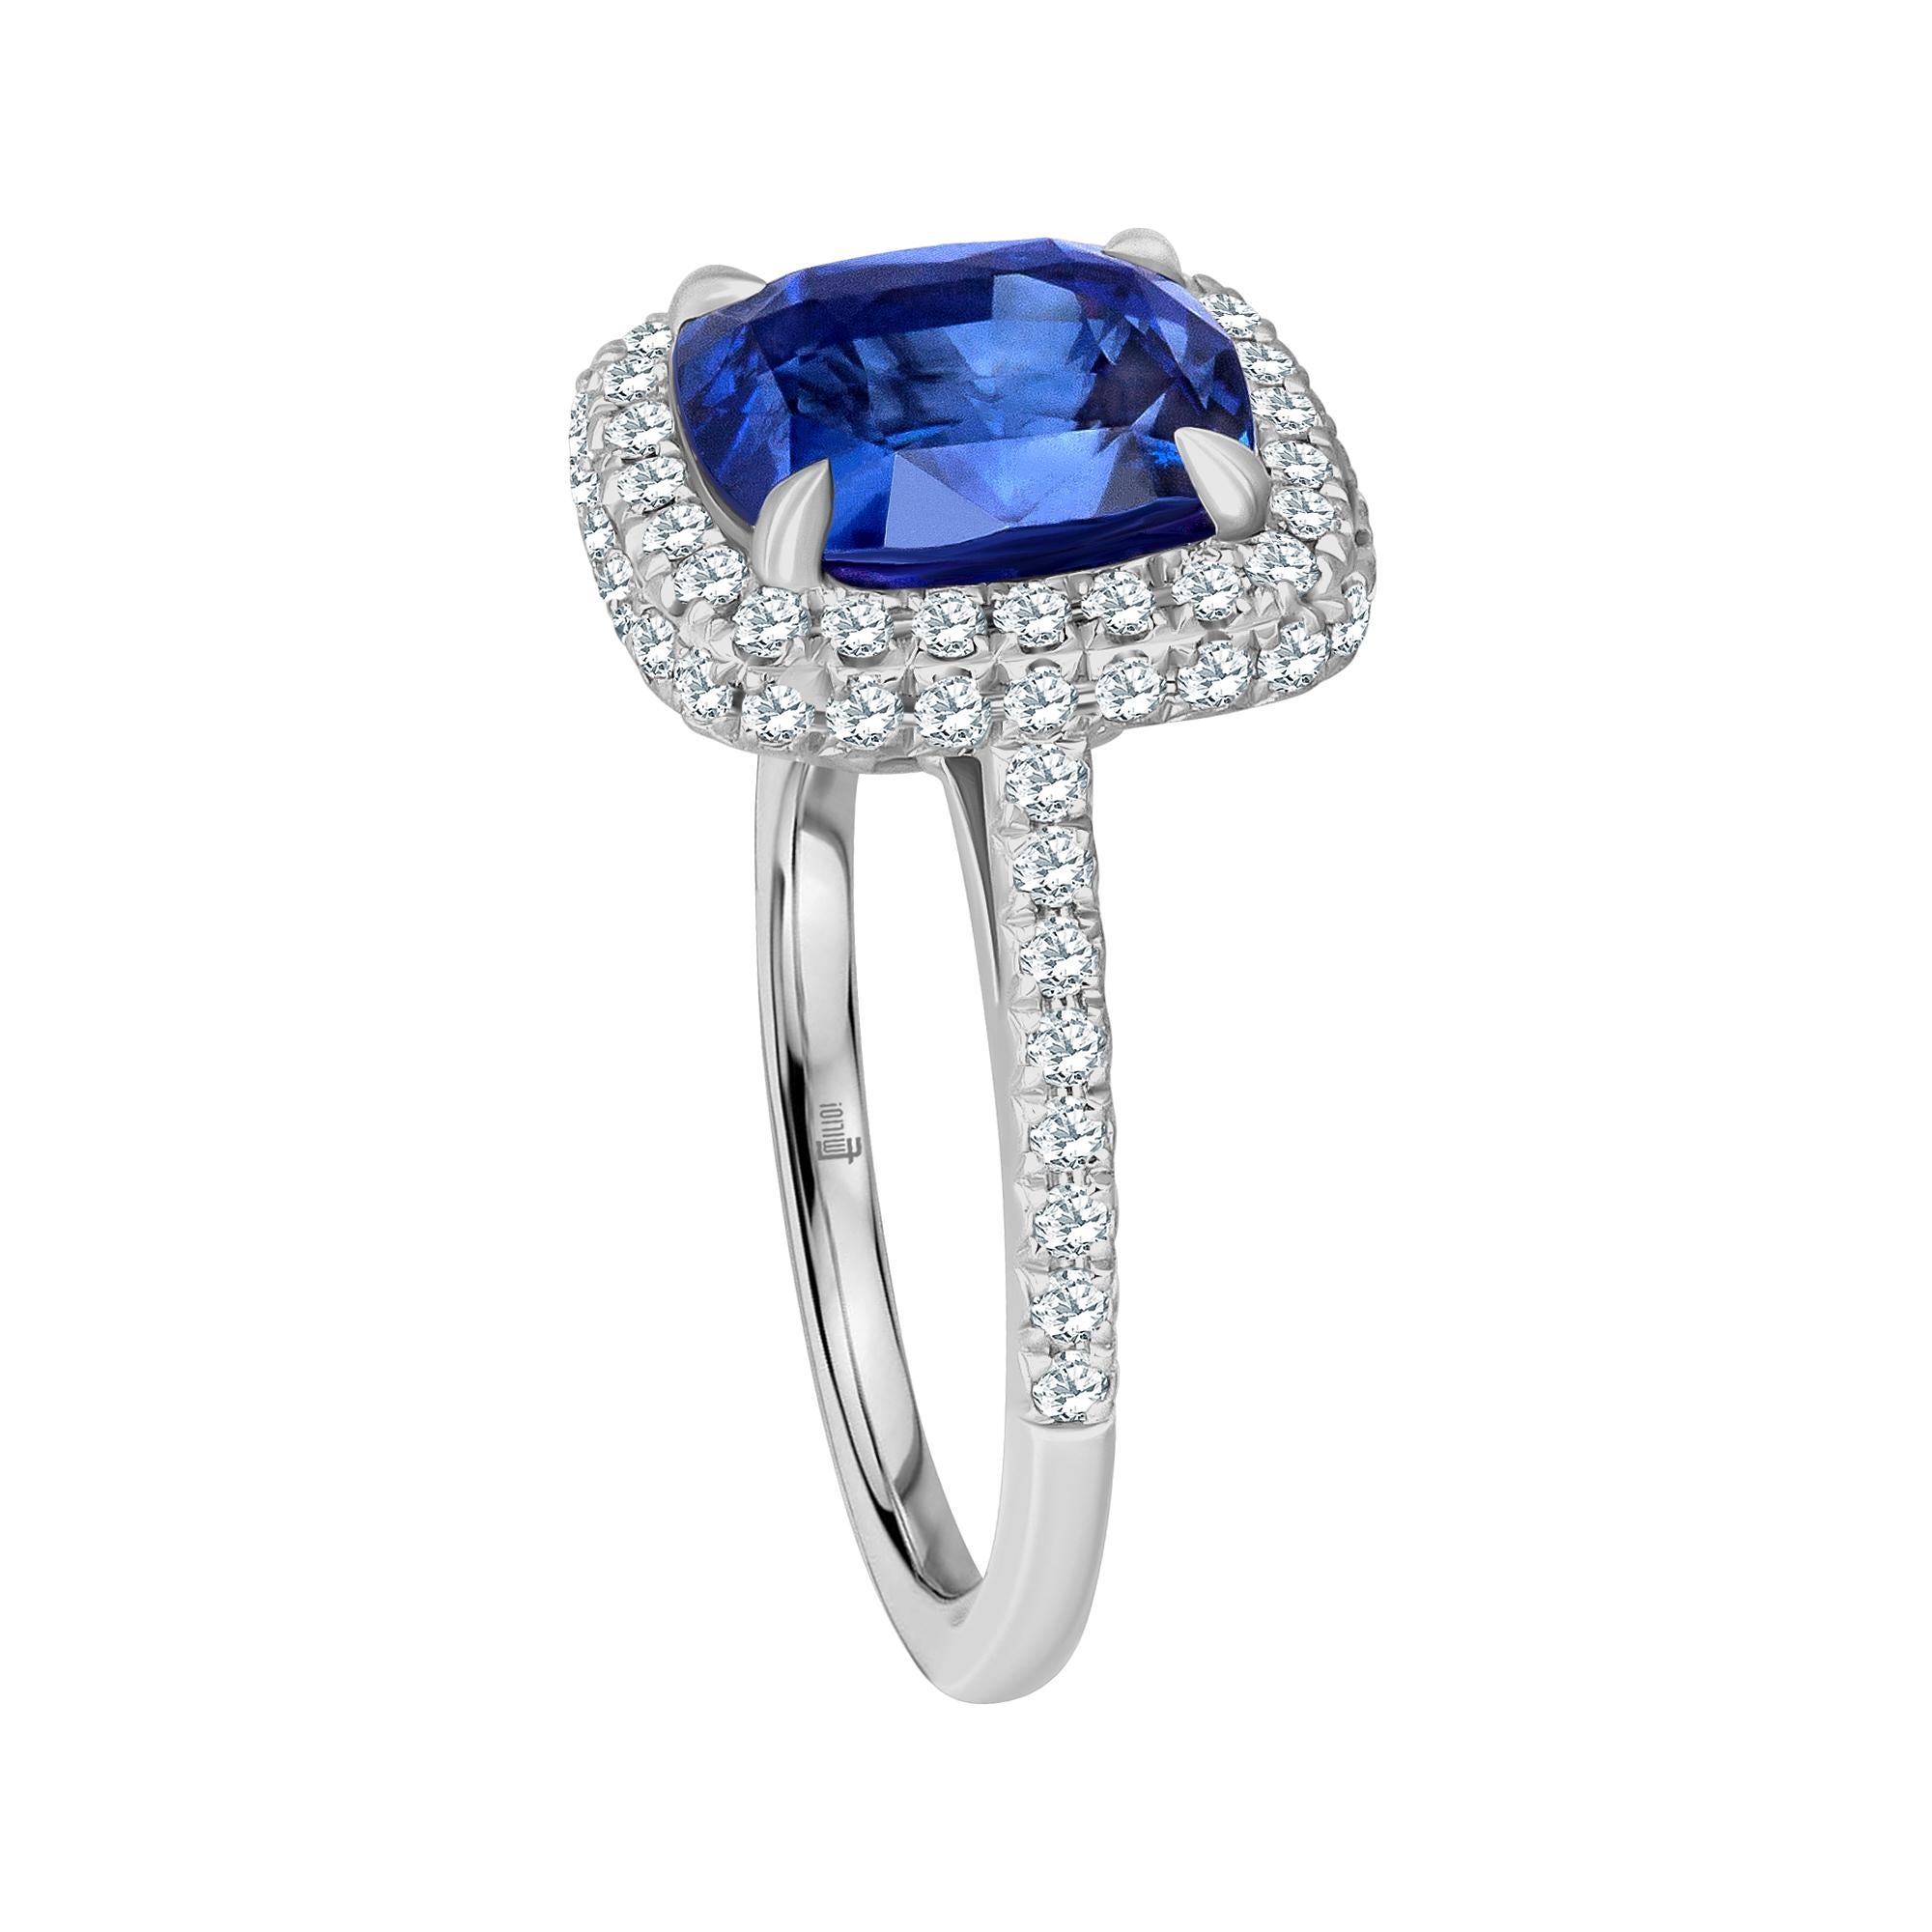 Emilio Jewelry Certified 5.99 Carat Sapphire Diamond Ring 
This amazing ring is unique and well thought out before Emilio designed it! Most women today want a ring that is striking, yet humble enough to wear to perform everyday errands. This ring is